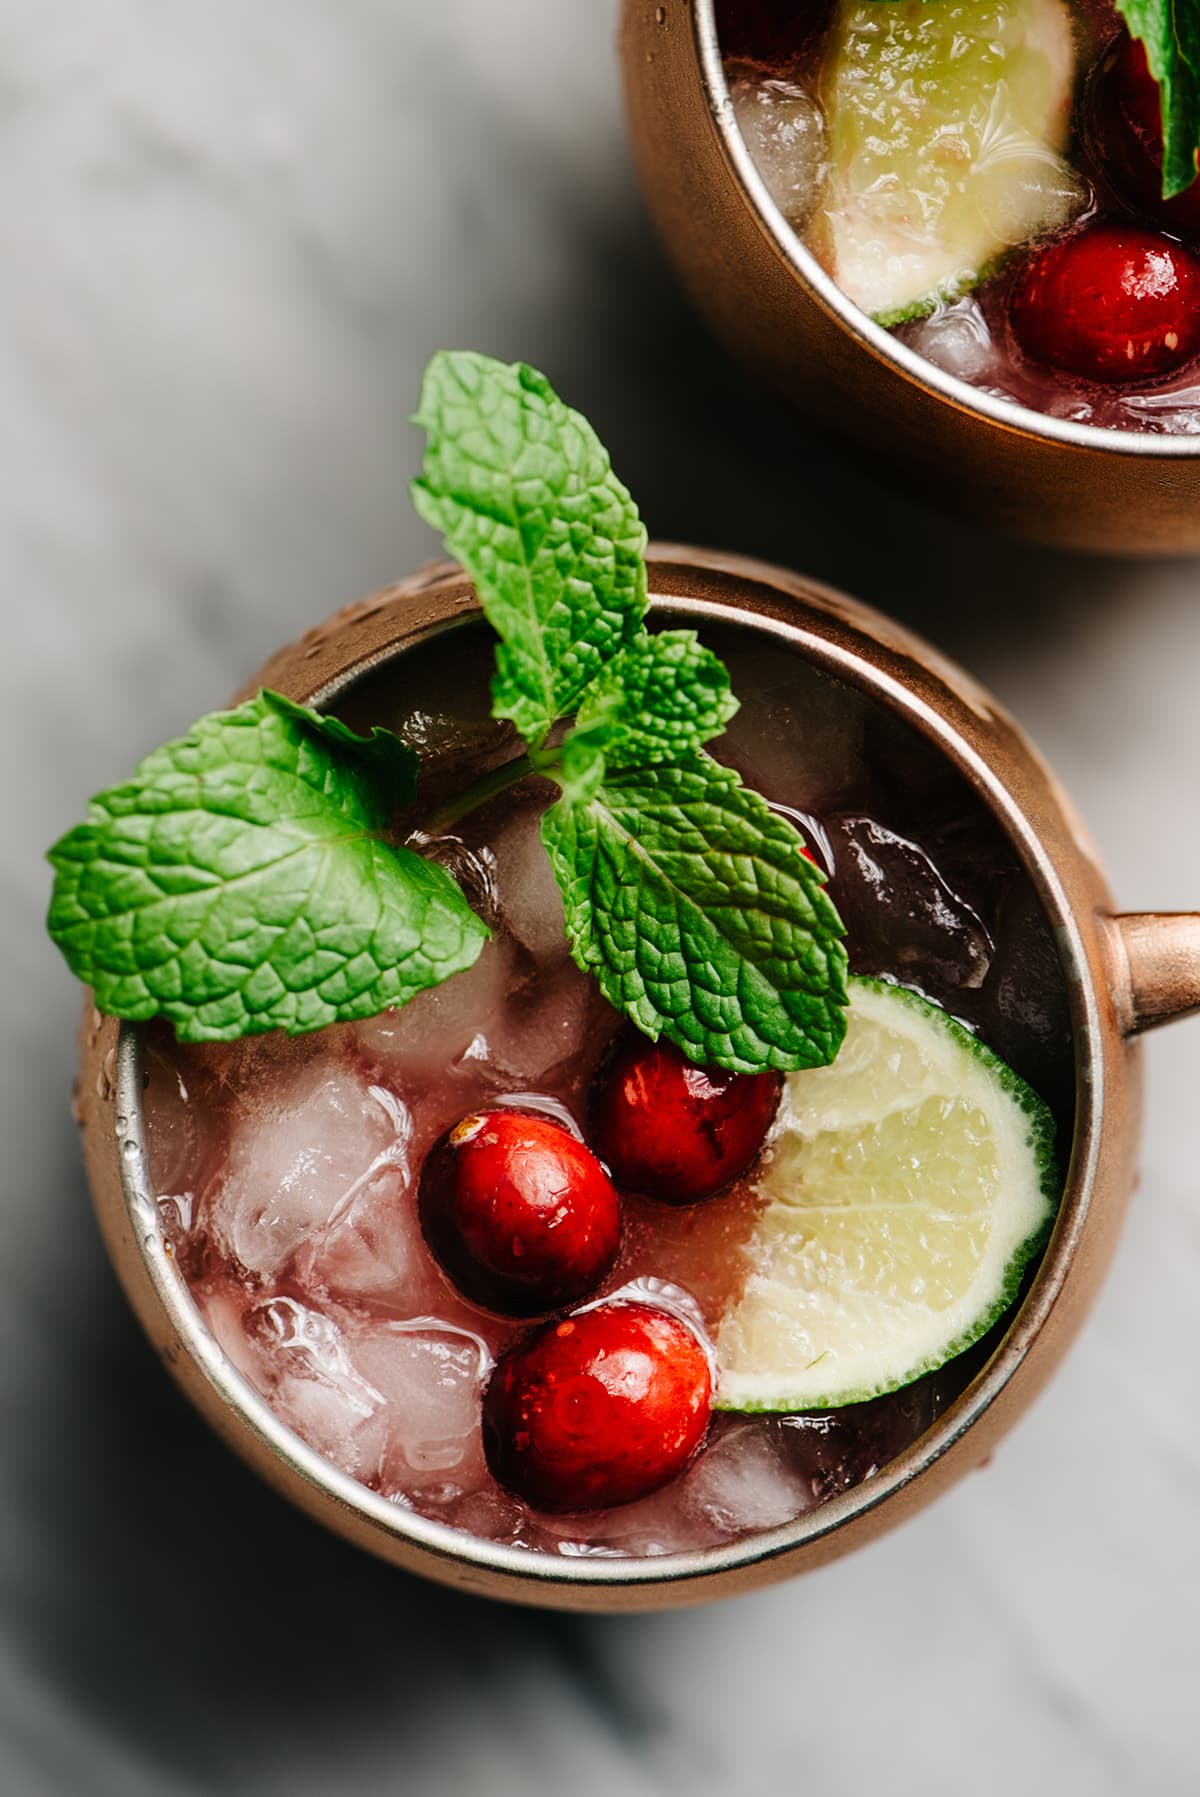 From overhead, two cranberry Moscow mule cocktails in copper mugs on a marble table, garnished with a lime wedge, mint sprig, and fresh cranberries.